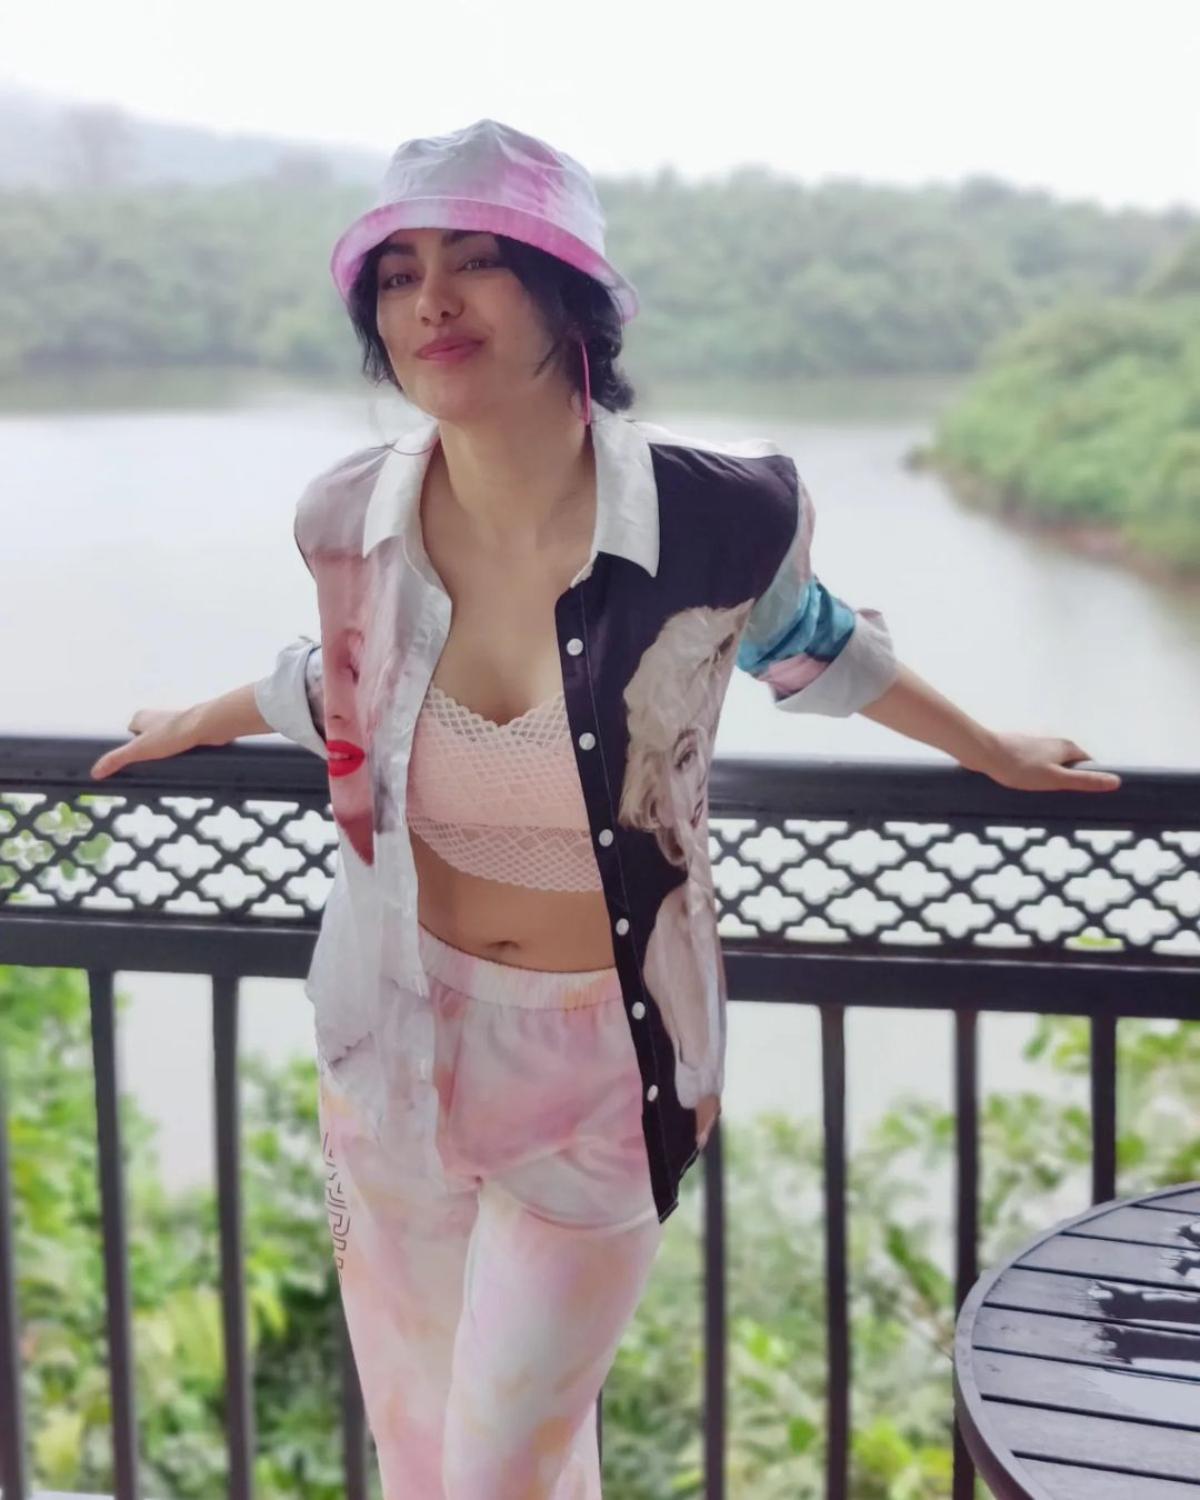 Who says you can't wear a printed shirt with tie-dye joggers and a bralette? Well, if you are Adah Sharma then you surely can! The 'Commando' star, who was last seen in Akshay Kumar-starrer 'Selfie', wears a printed oversize shirt, with photos of Marilyn Monroe splashed all over, with her sexy bralette and tie-dye joggers with her nonchalant grace. To jazz up her otherwise casual ensemble, the actor tops up her quirky, mix-and-match comfy look with a bucket hat. 